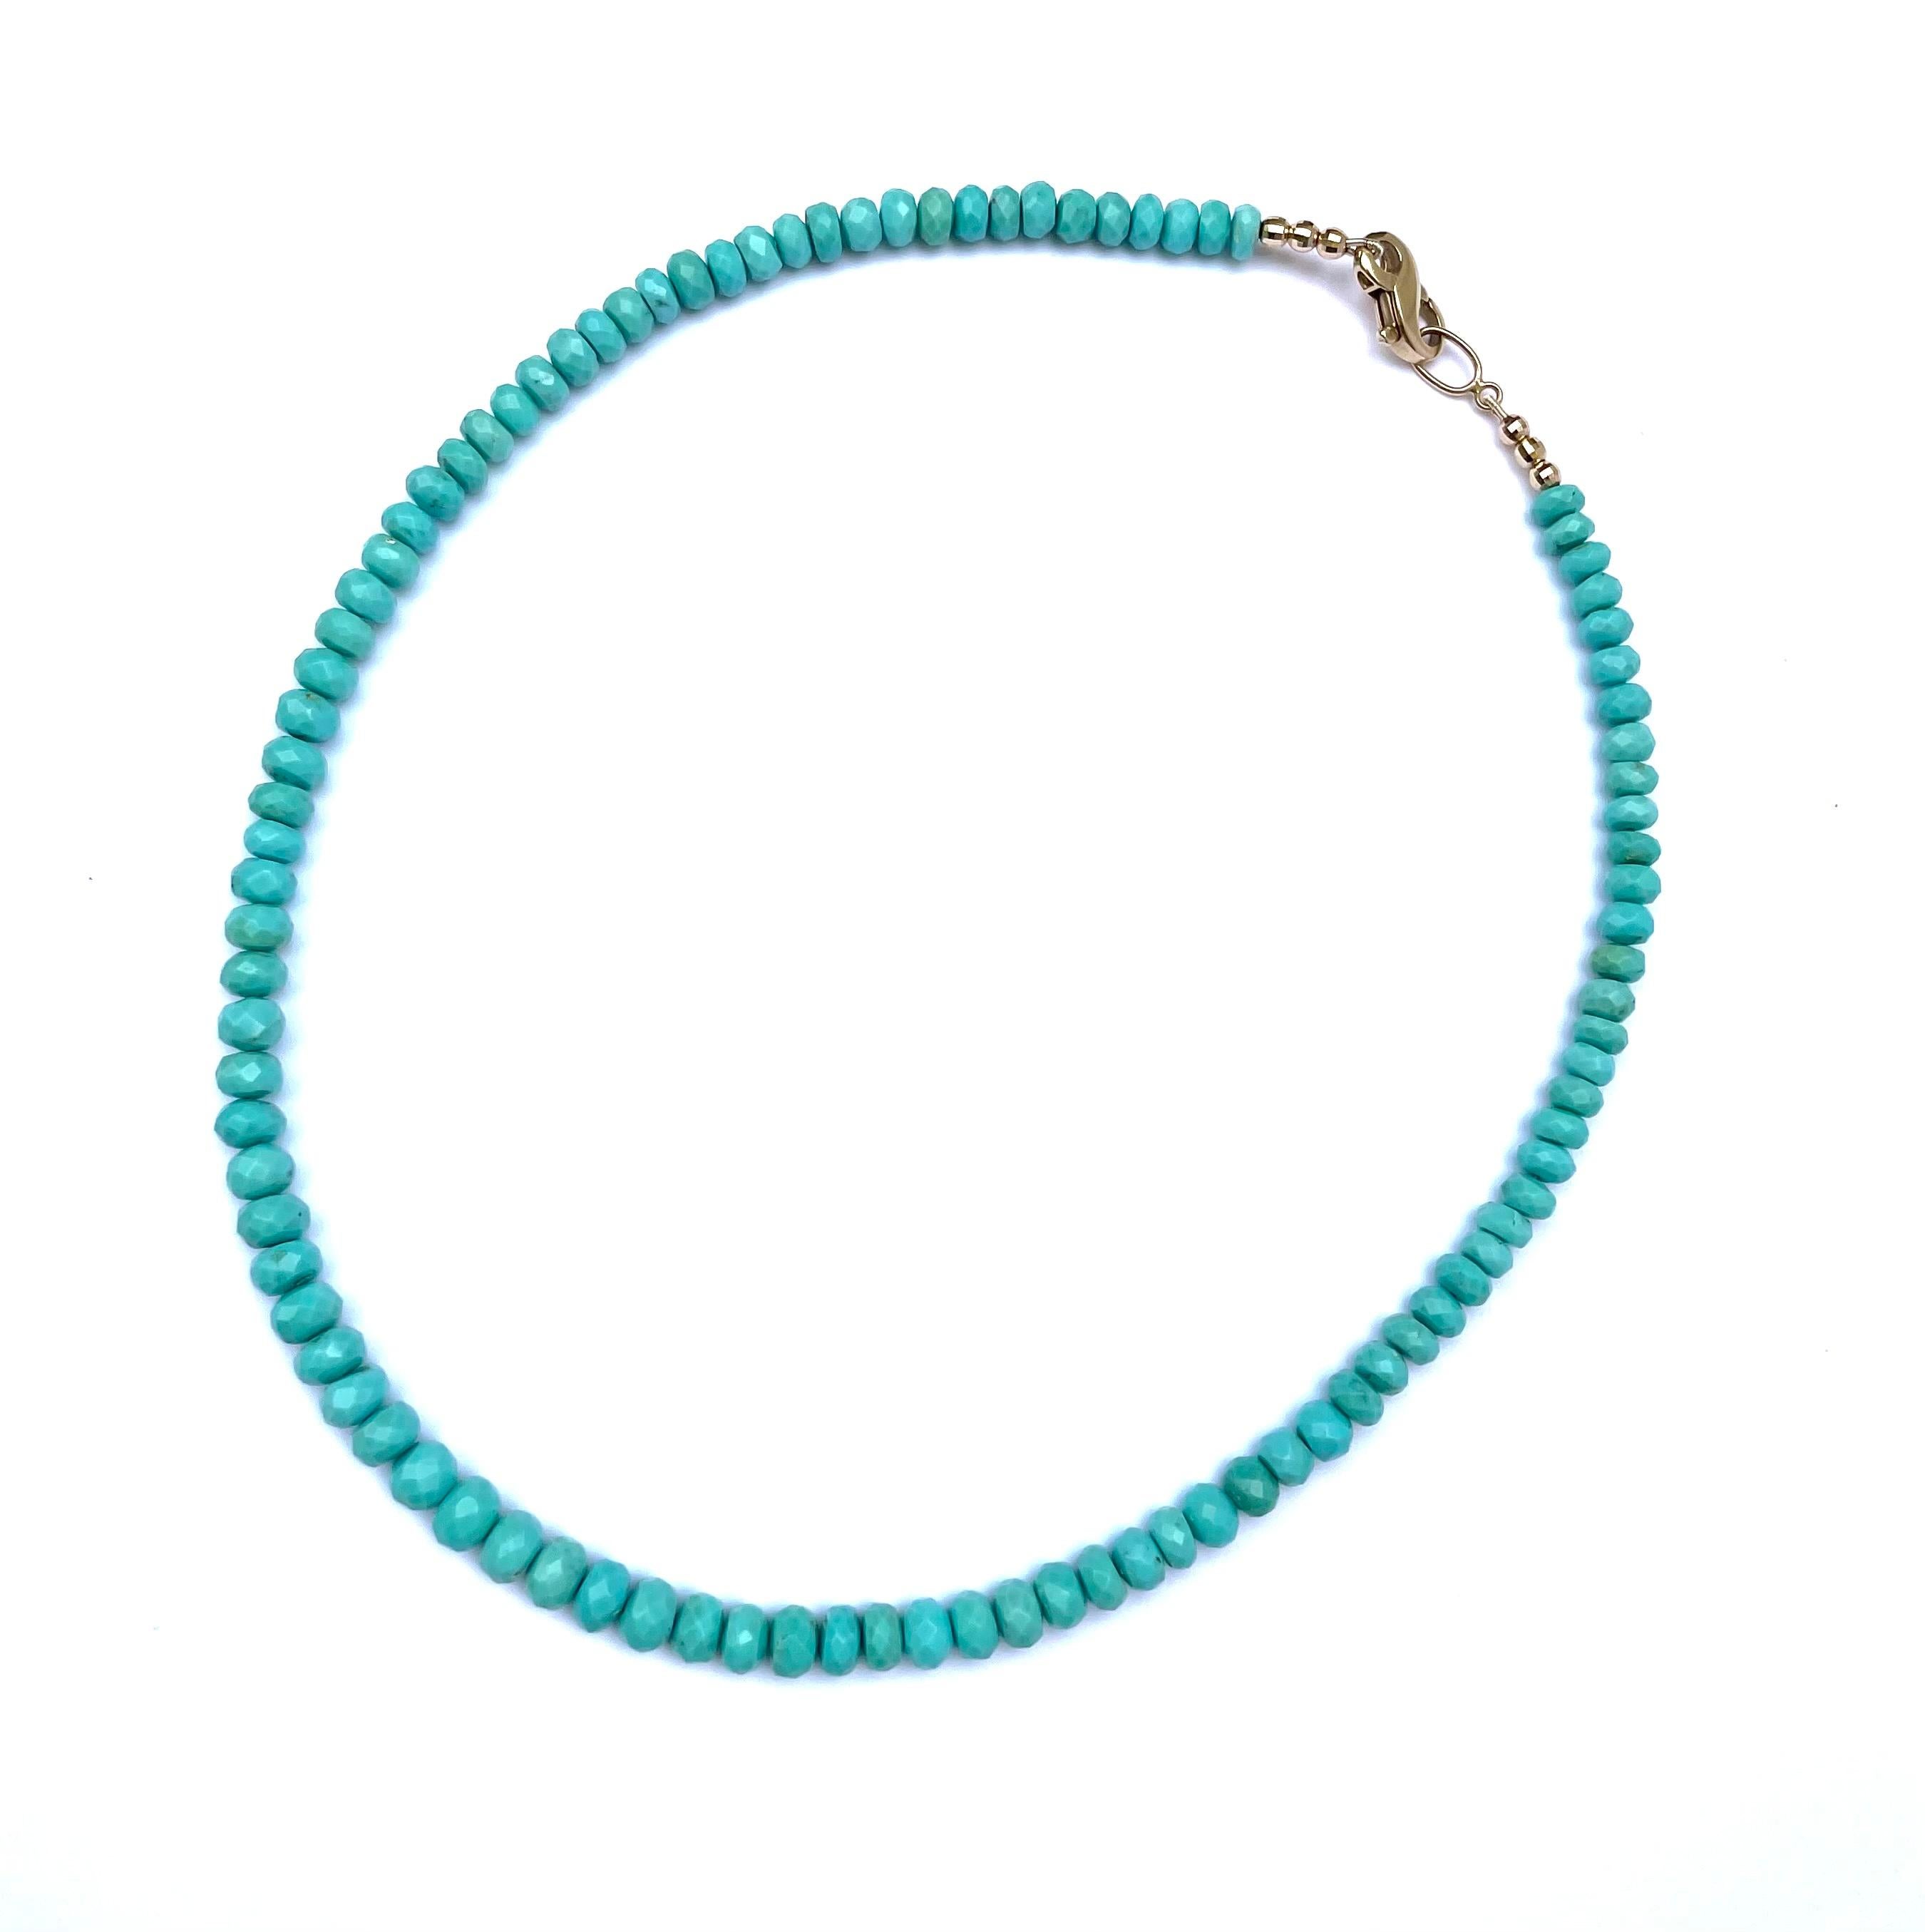 3 strand turquoise necklace